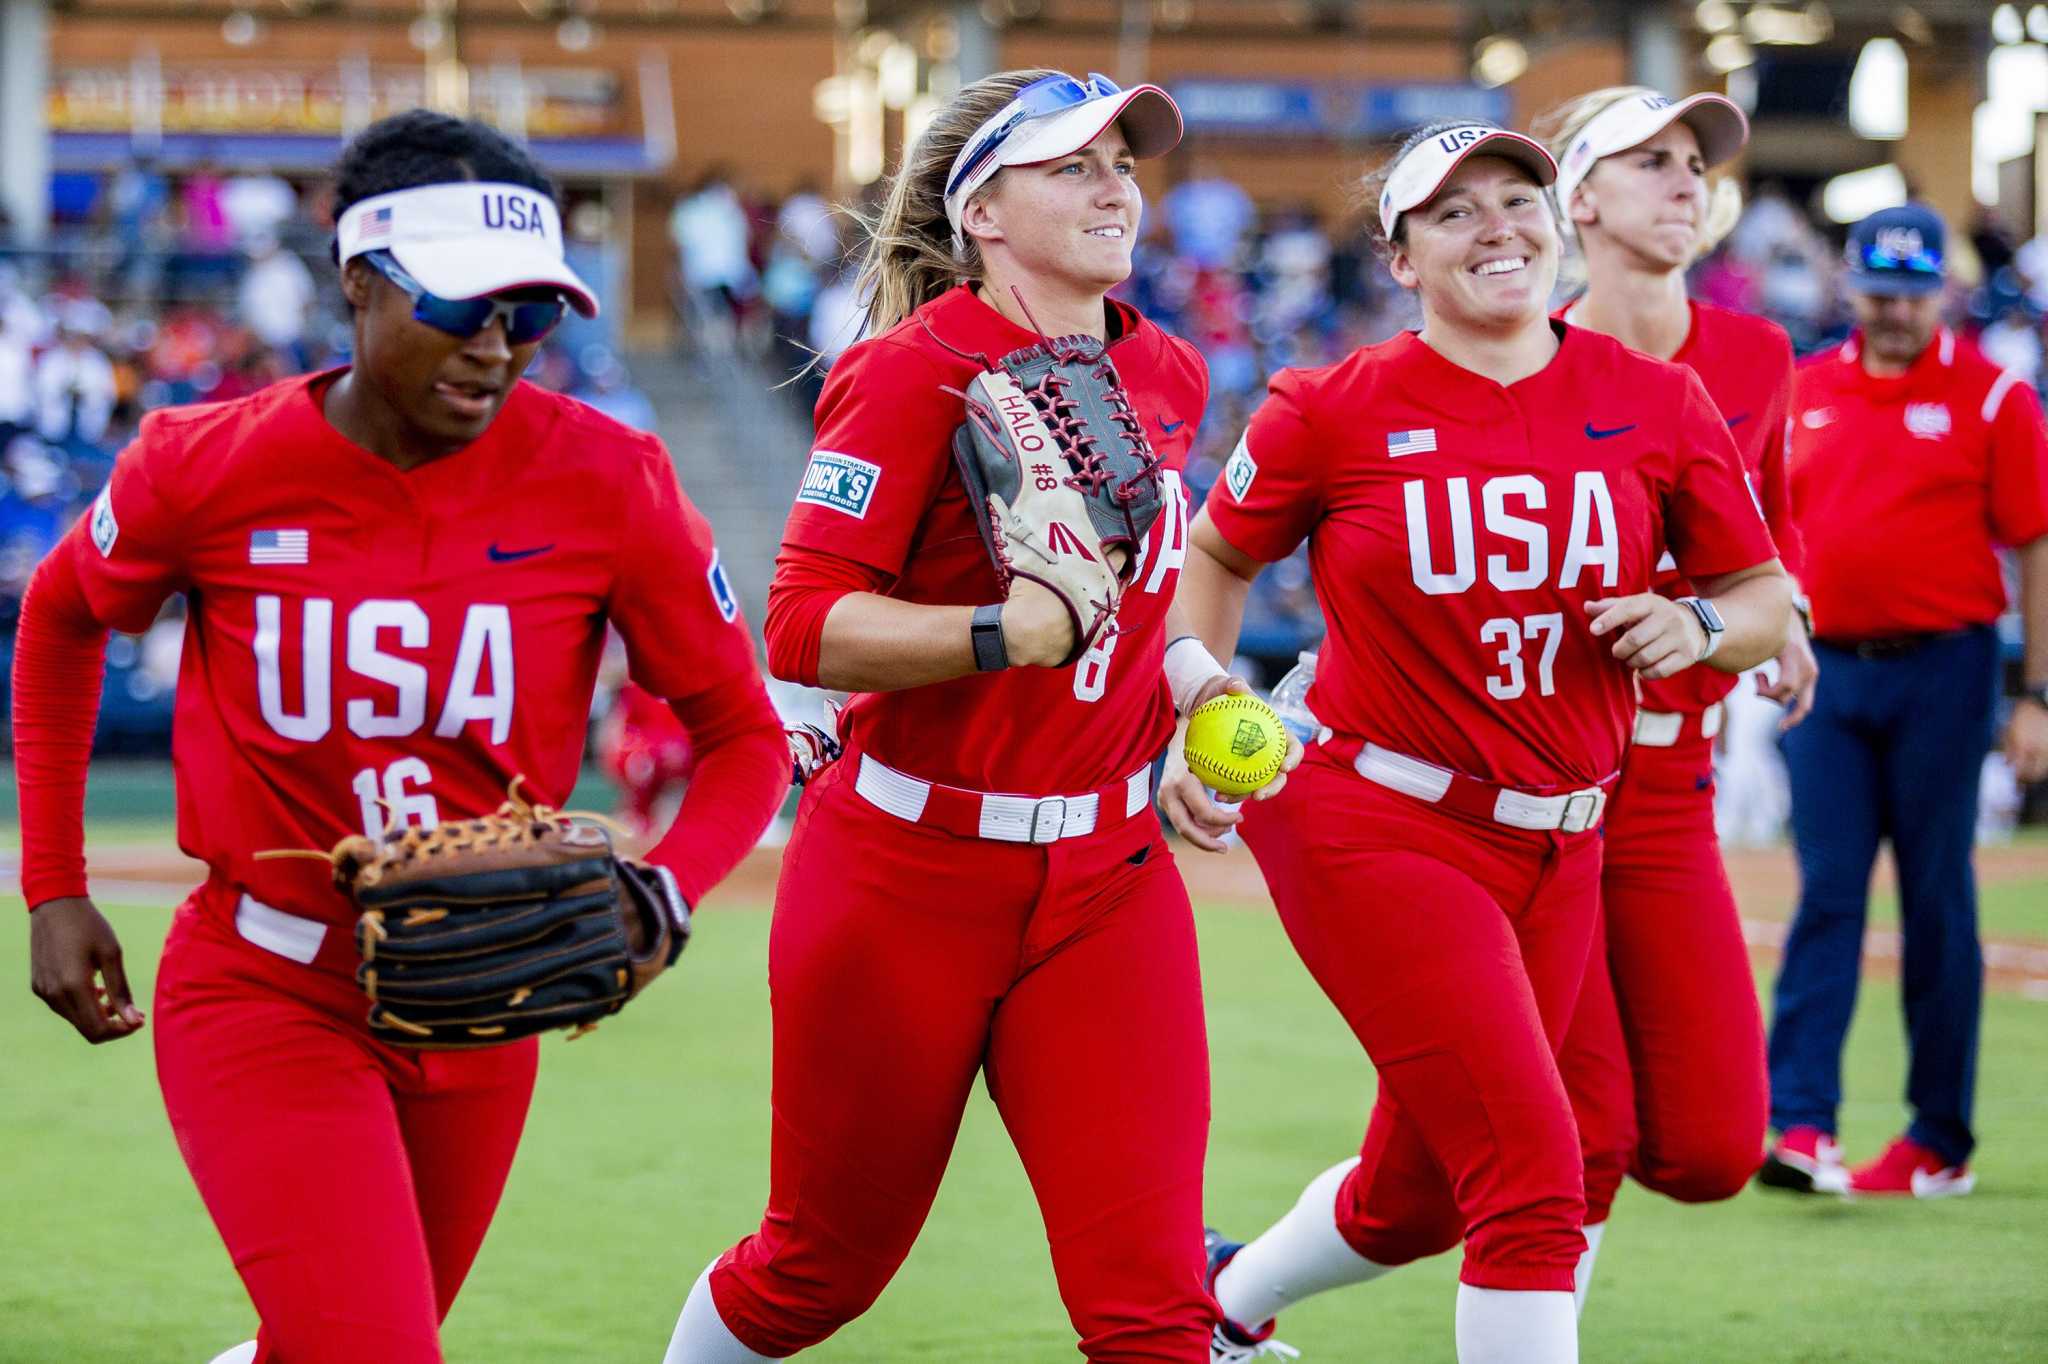 Does Women's Baseball Have a Future in the U.S.?